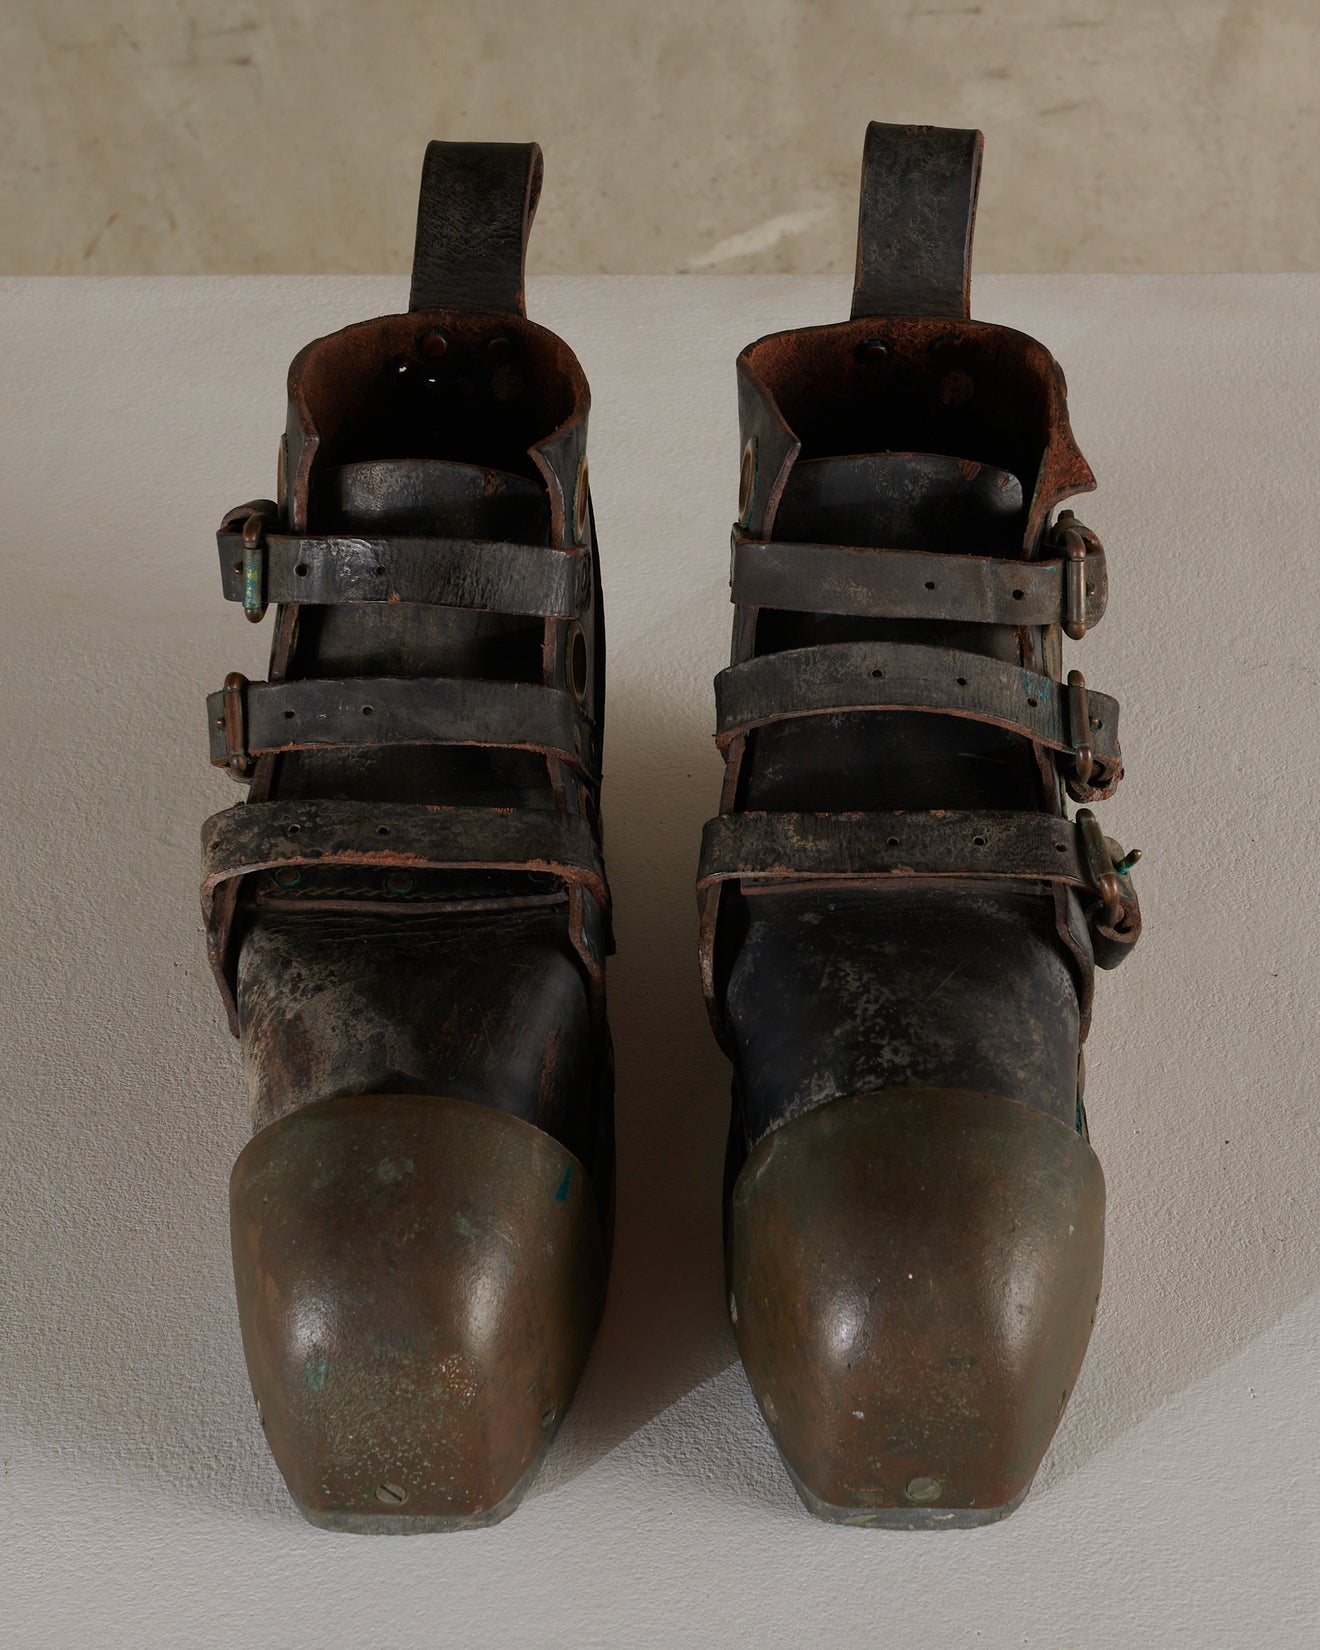 PAIR OF RUSSIAN DEEP SEA DIVING BOOTS